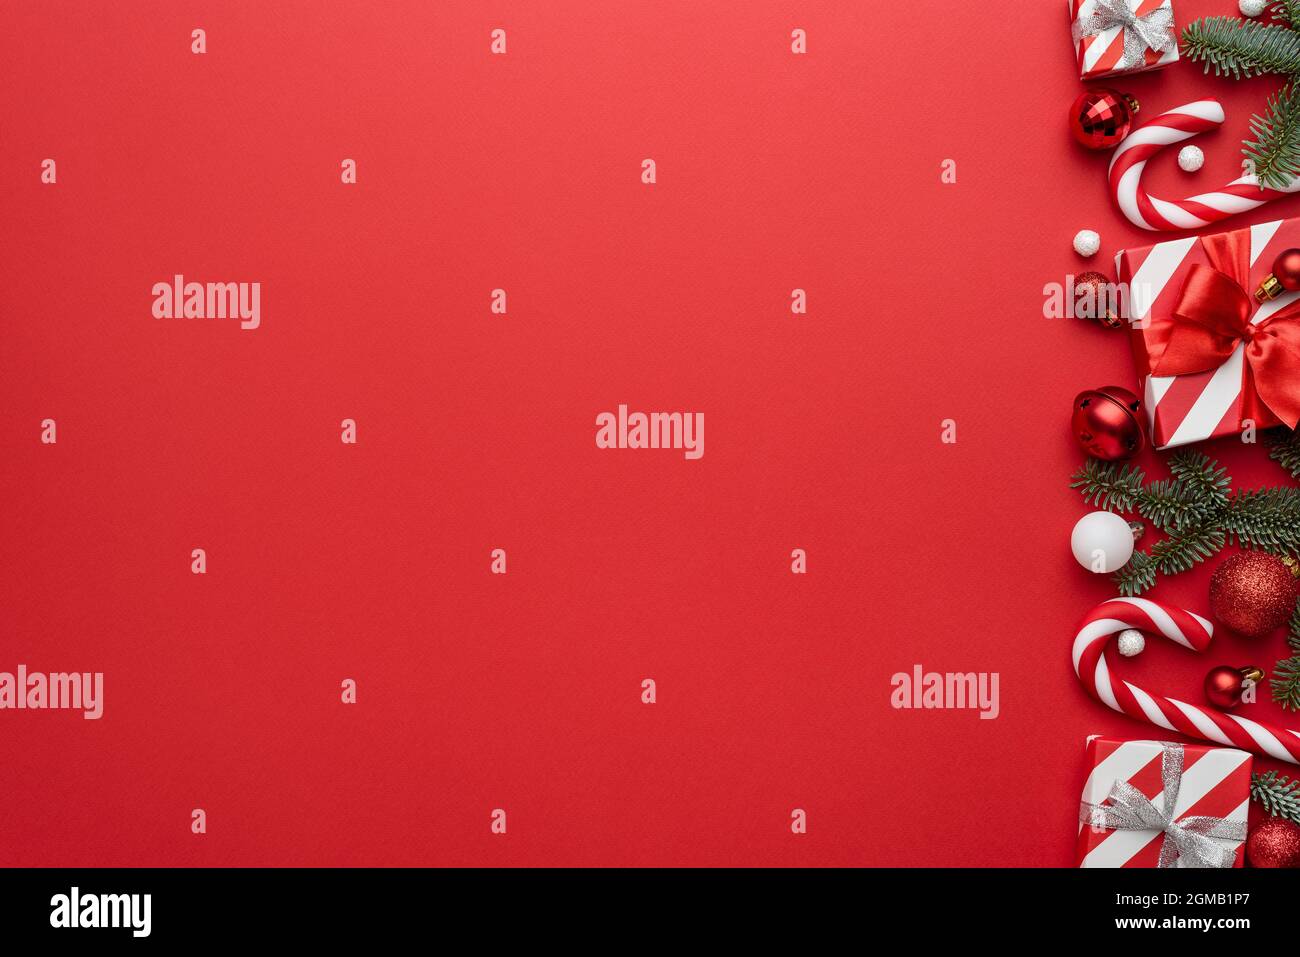 Holiday Christmas background with a frame made of decorated fir branches on red. Flat lay, top view and copy space for text Stock Photo